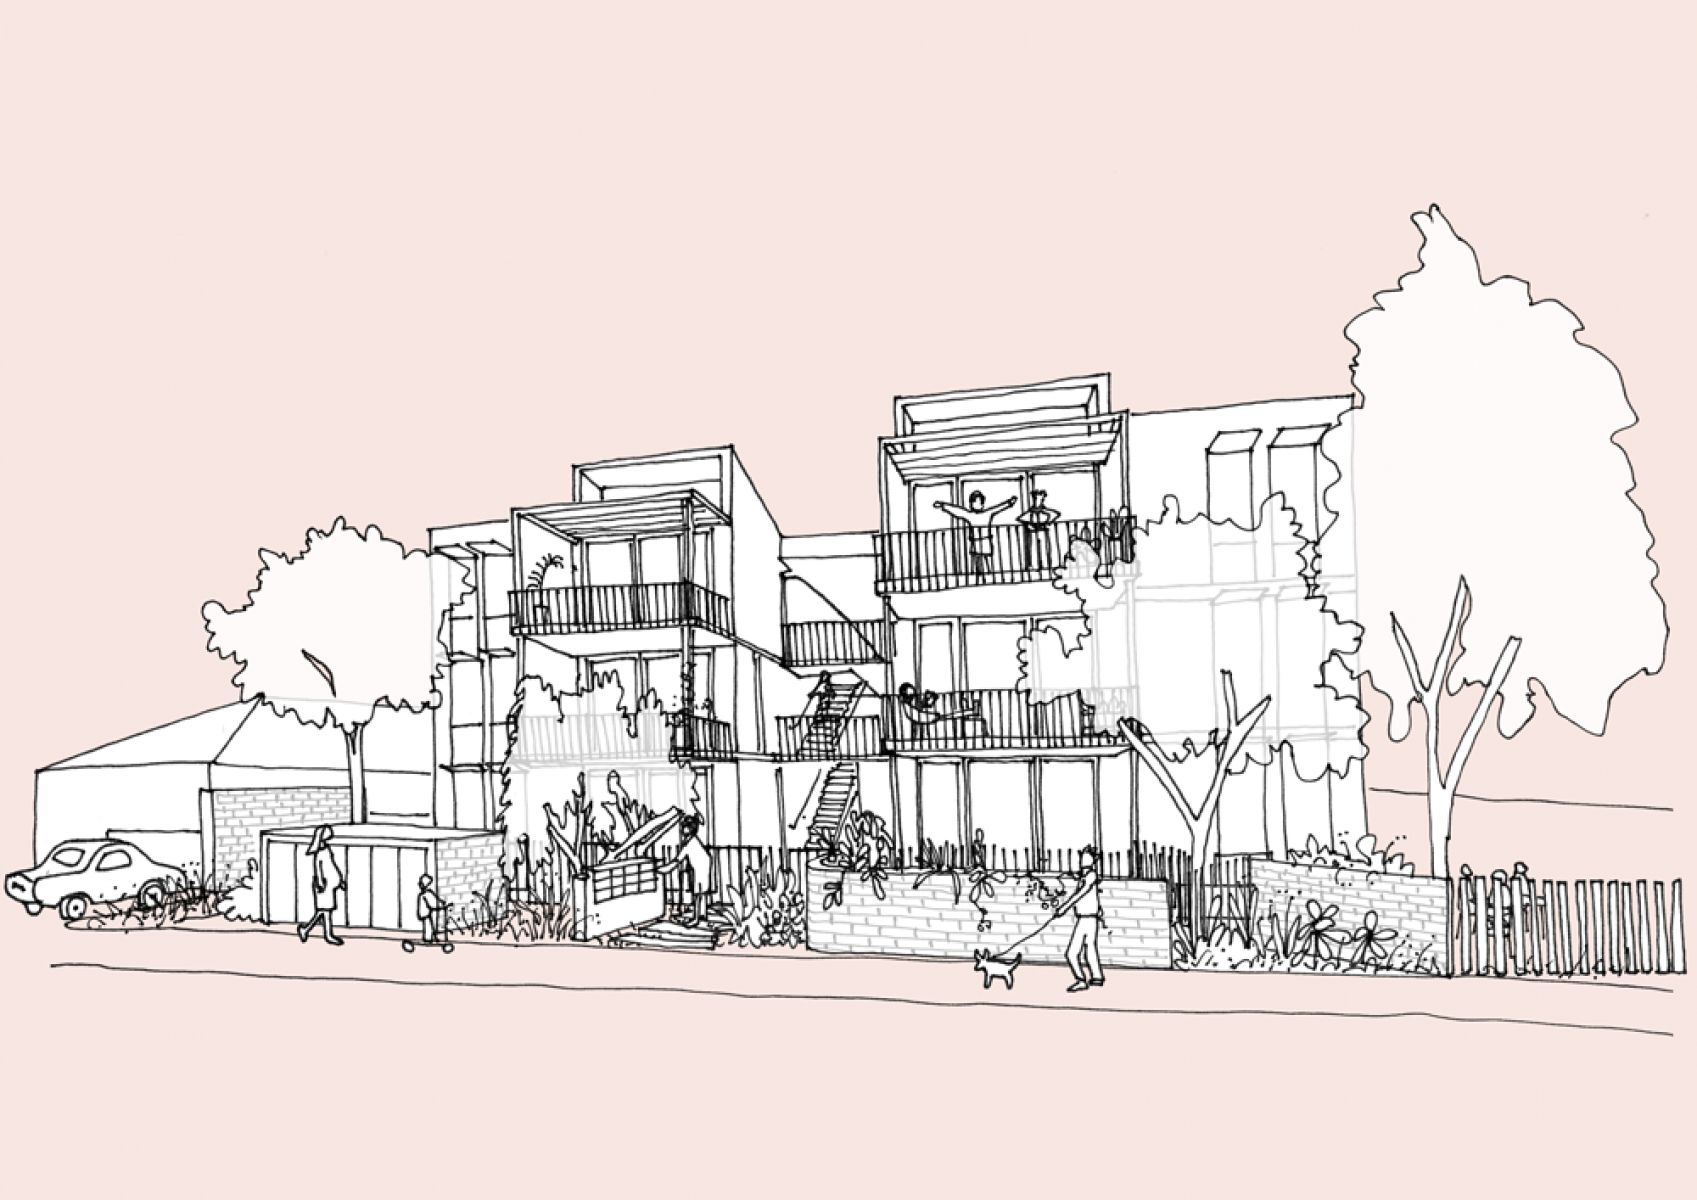 Streetscape sketch by BoardGrove Architects